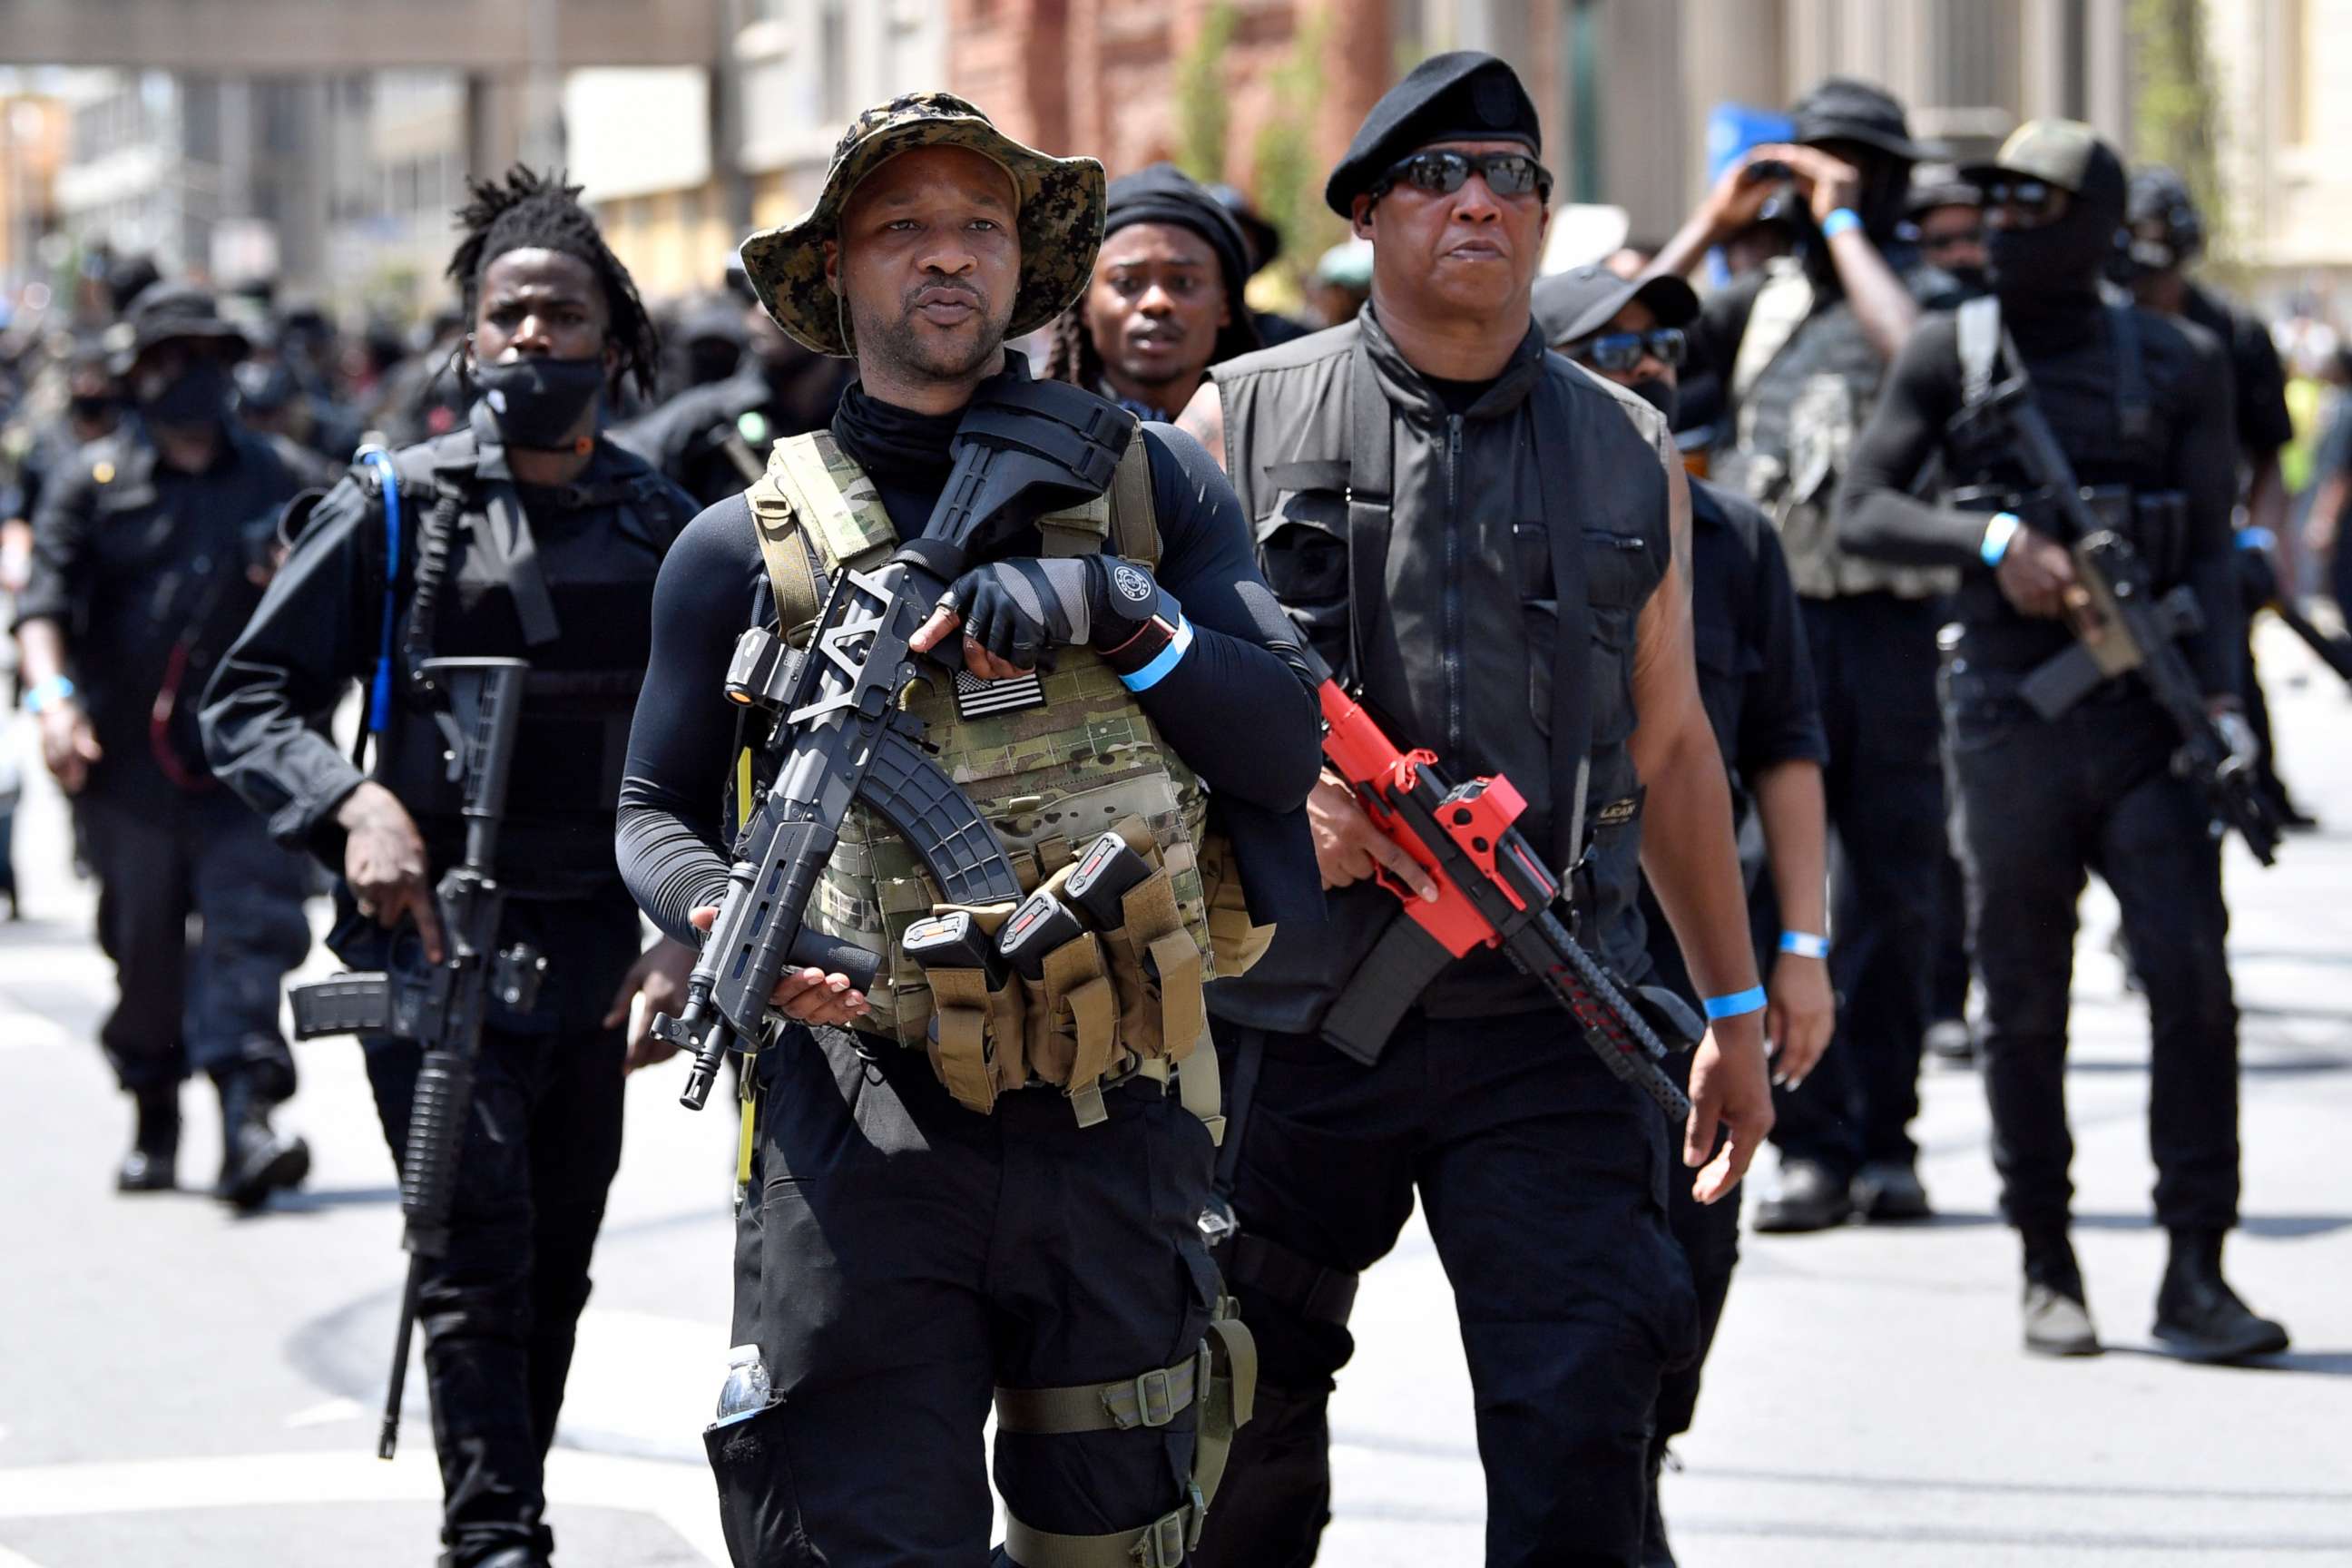 PHOTO: Armed members of the "NAFC" march through downtown toward the Hall of Justice in Louisville, Ky., Saturday, July 25, 2020.